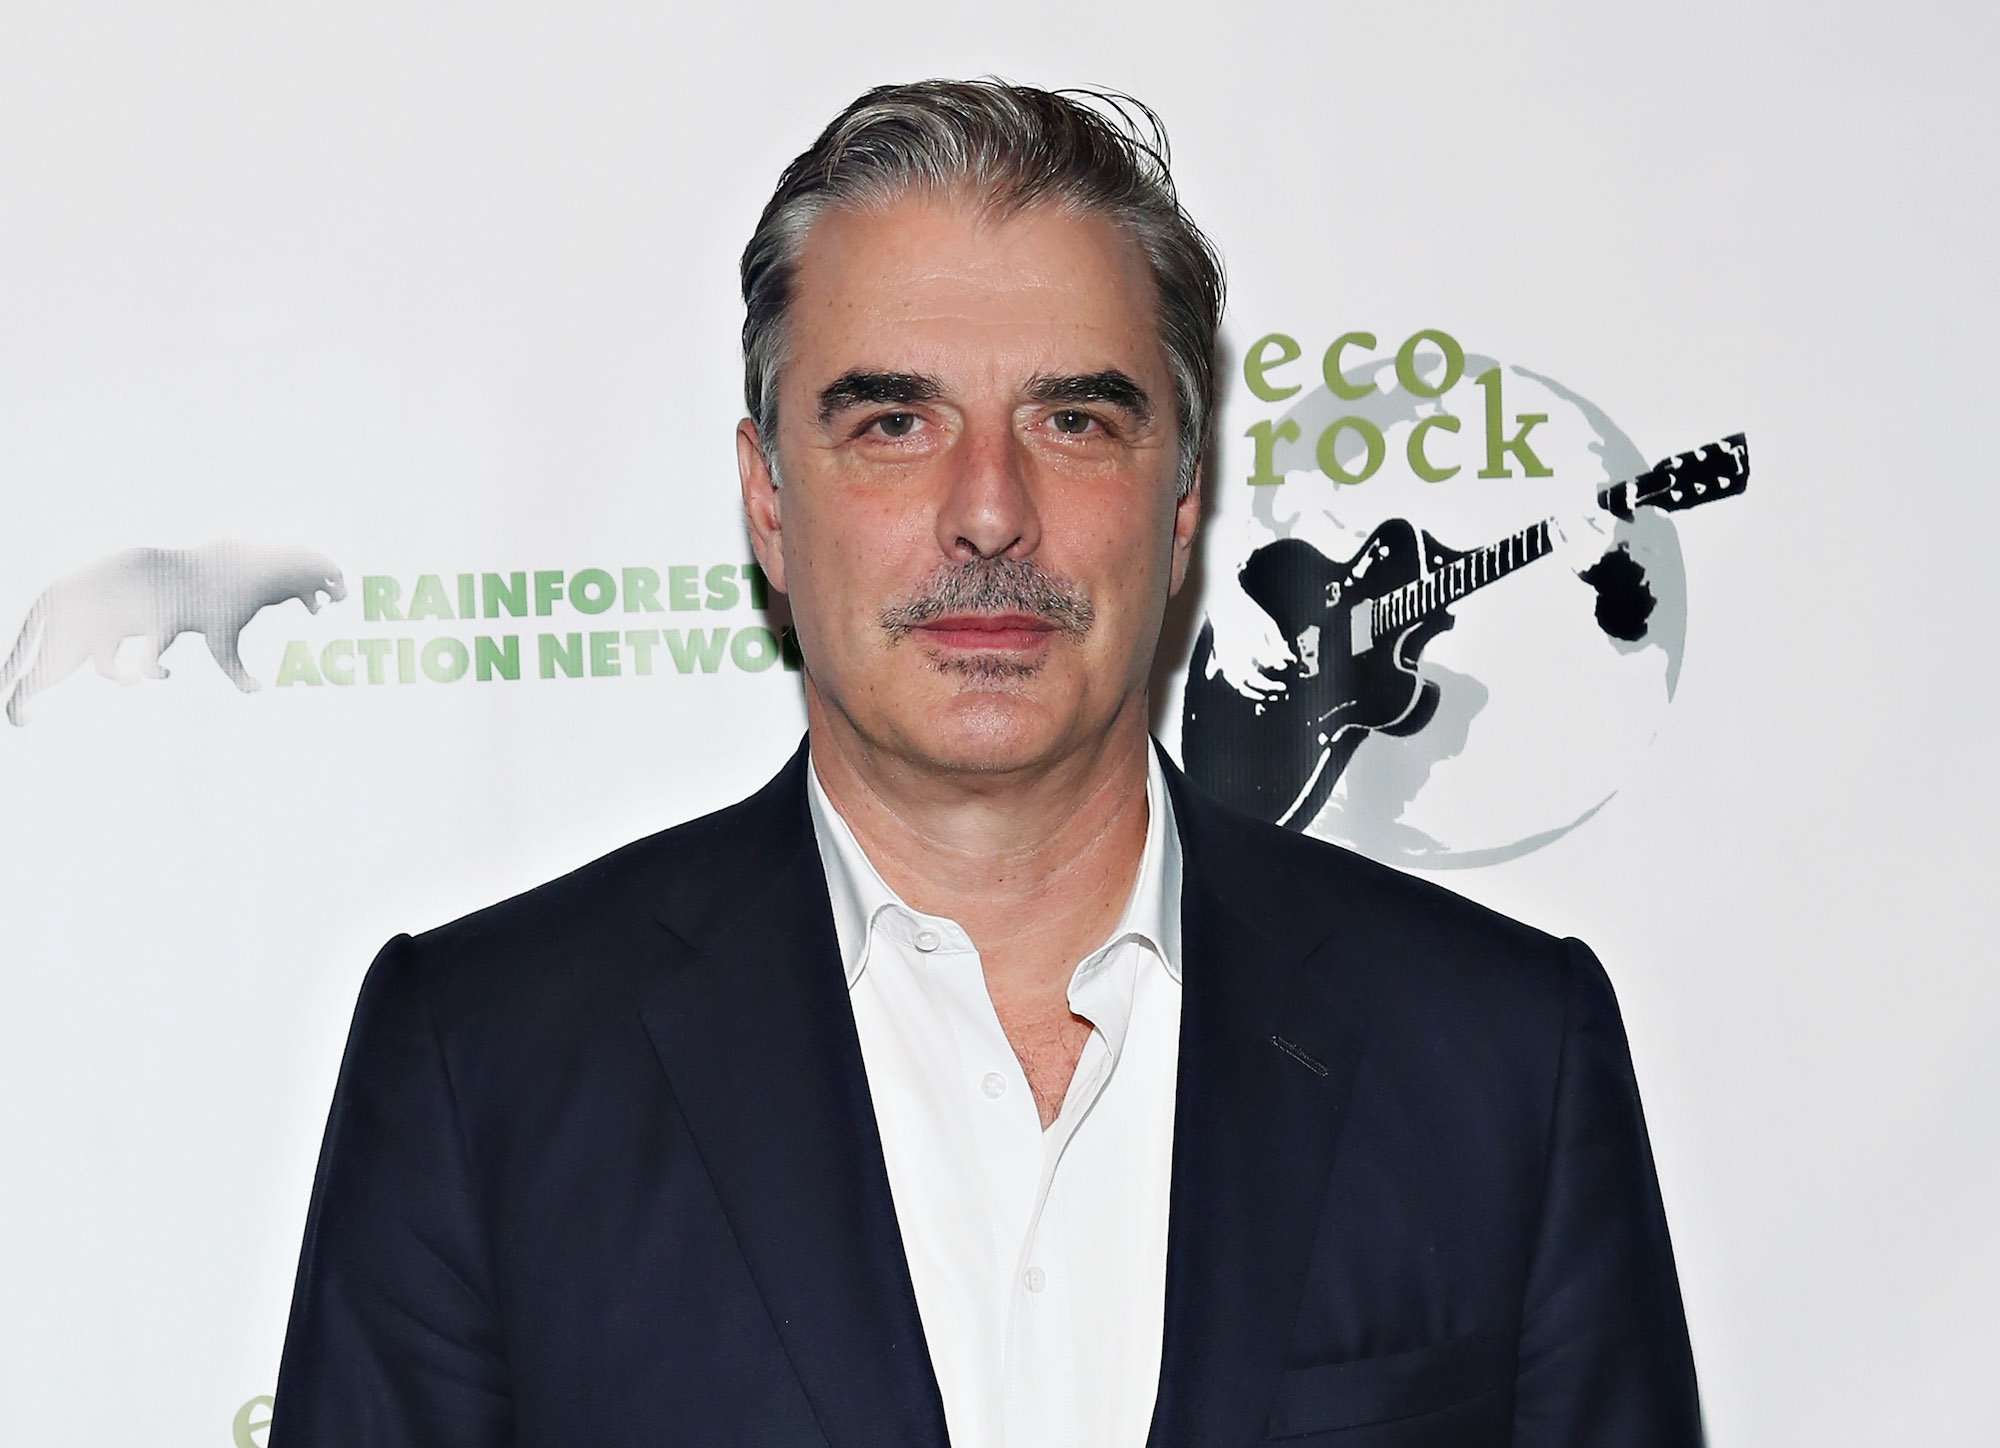 Chris Noth smiling in front of a white background